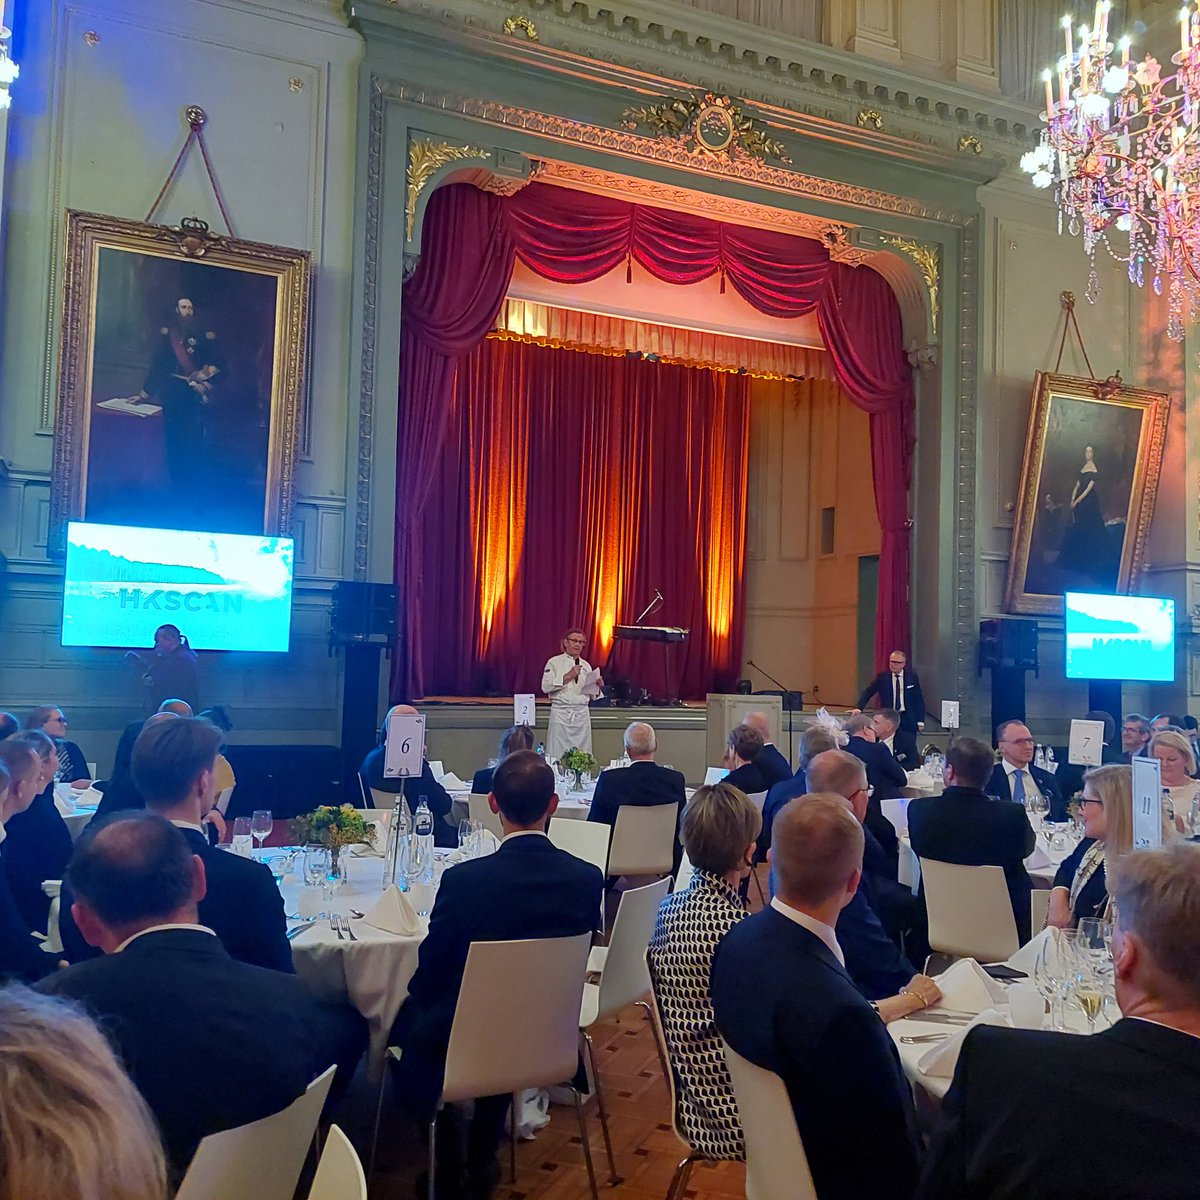 SG @pekka_pesonen addressed this evening the audience at the celebration of 30y of Brussels Finnish 🇫🇮 agriculture office by outlining main challanges and preospects for the future of EU & Finnish farmers and agri-cooperatives #Bryssel30v Congratulations @MTKry @PellervoFi 🙌 🥳